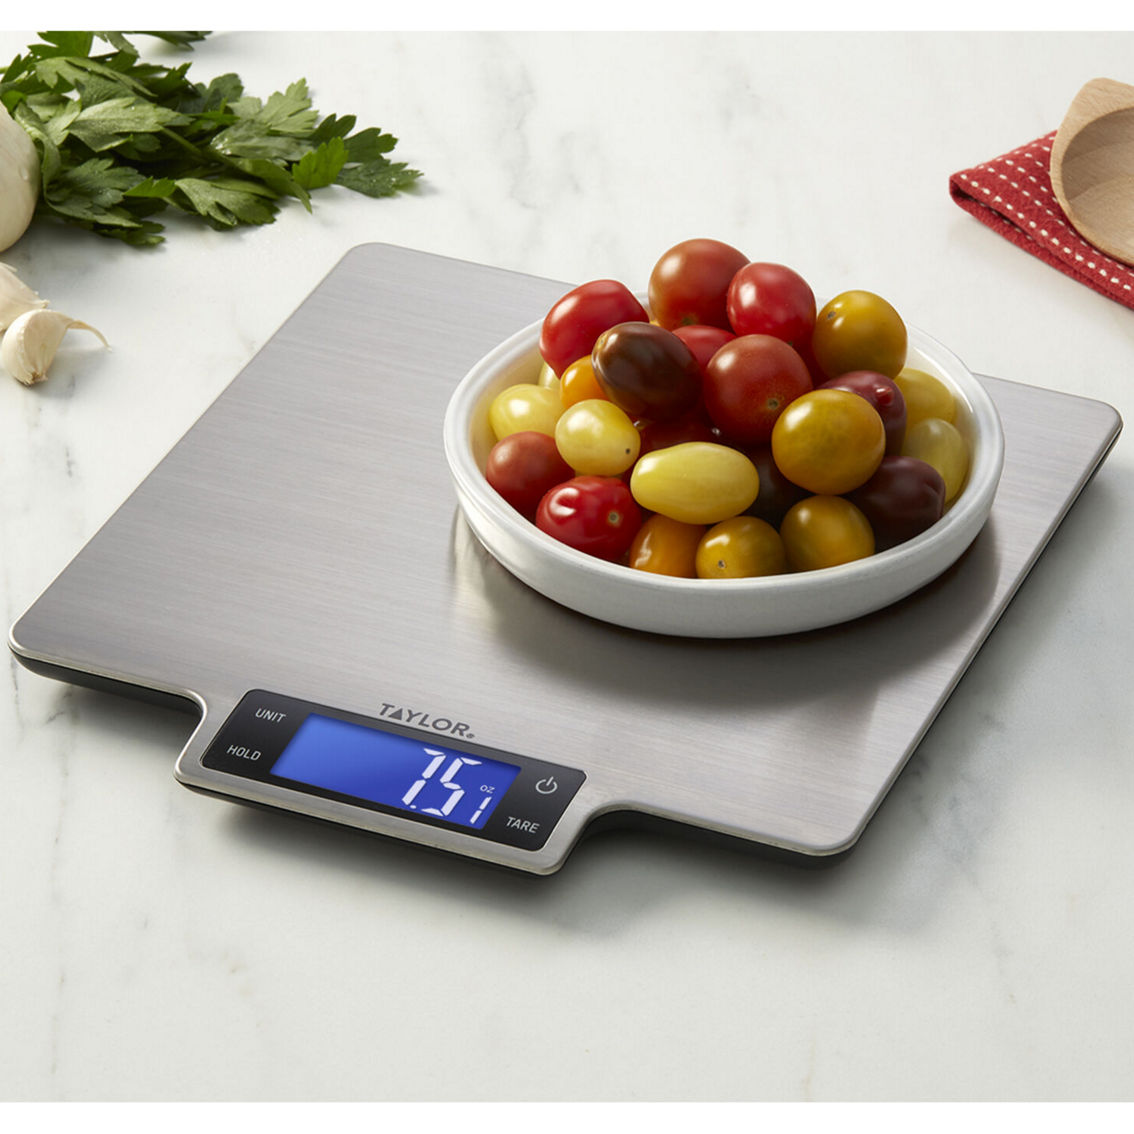 Taylor Large Platform High Capacity Stainless Steel Scale - Image 5 of 5